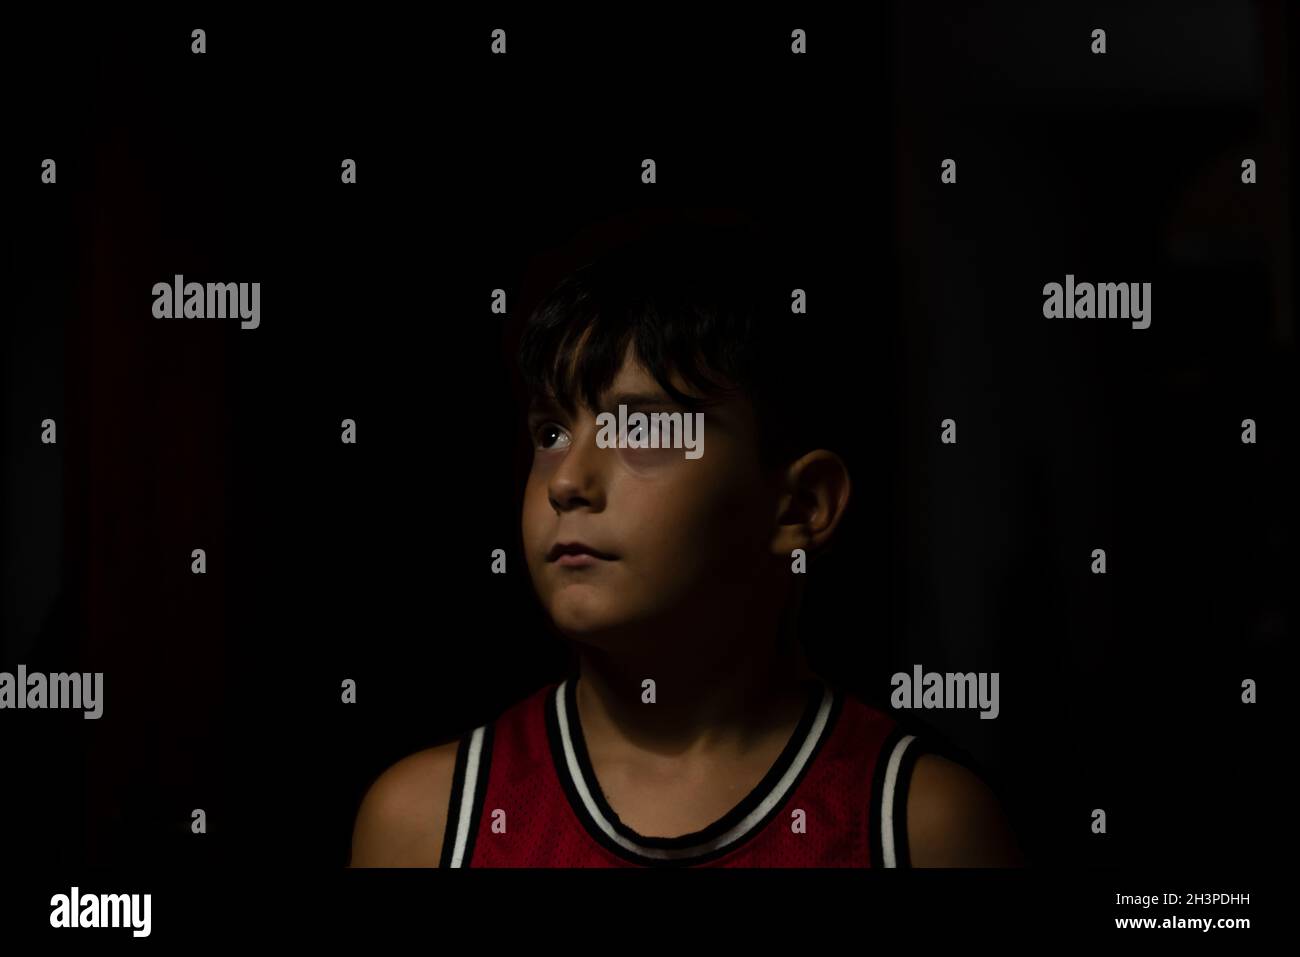 portrait of a boy in a red sports jersey with zenithal light Stock Photo